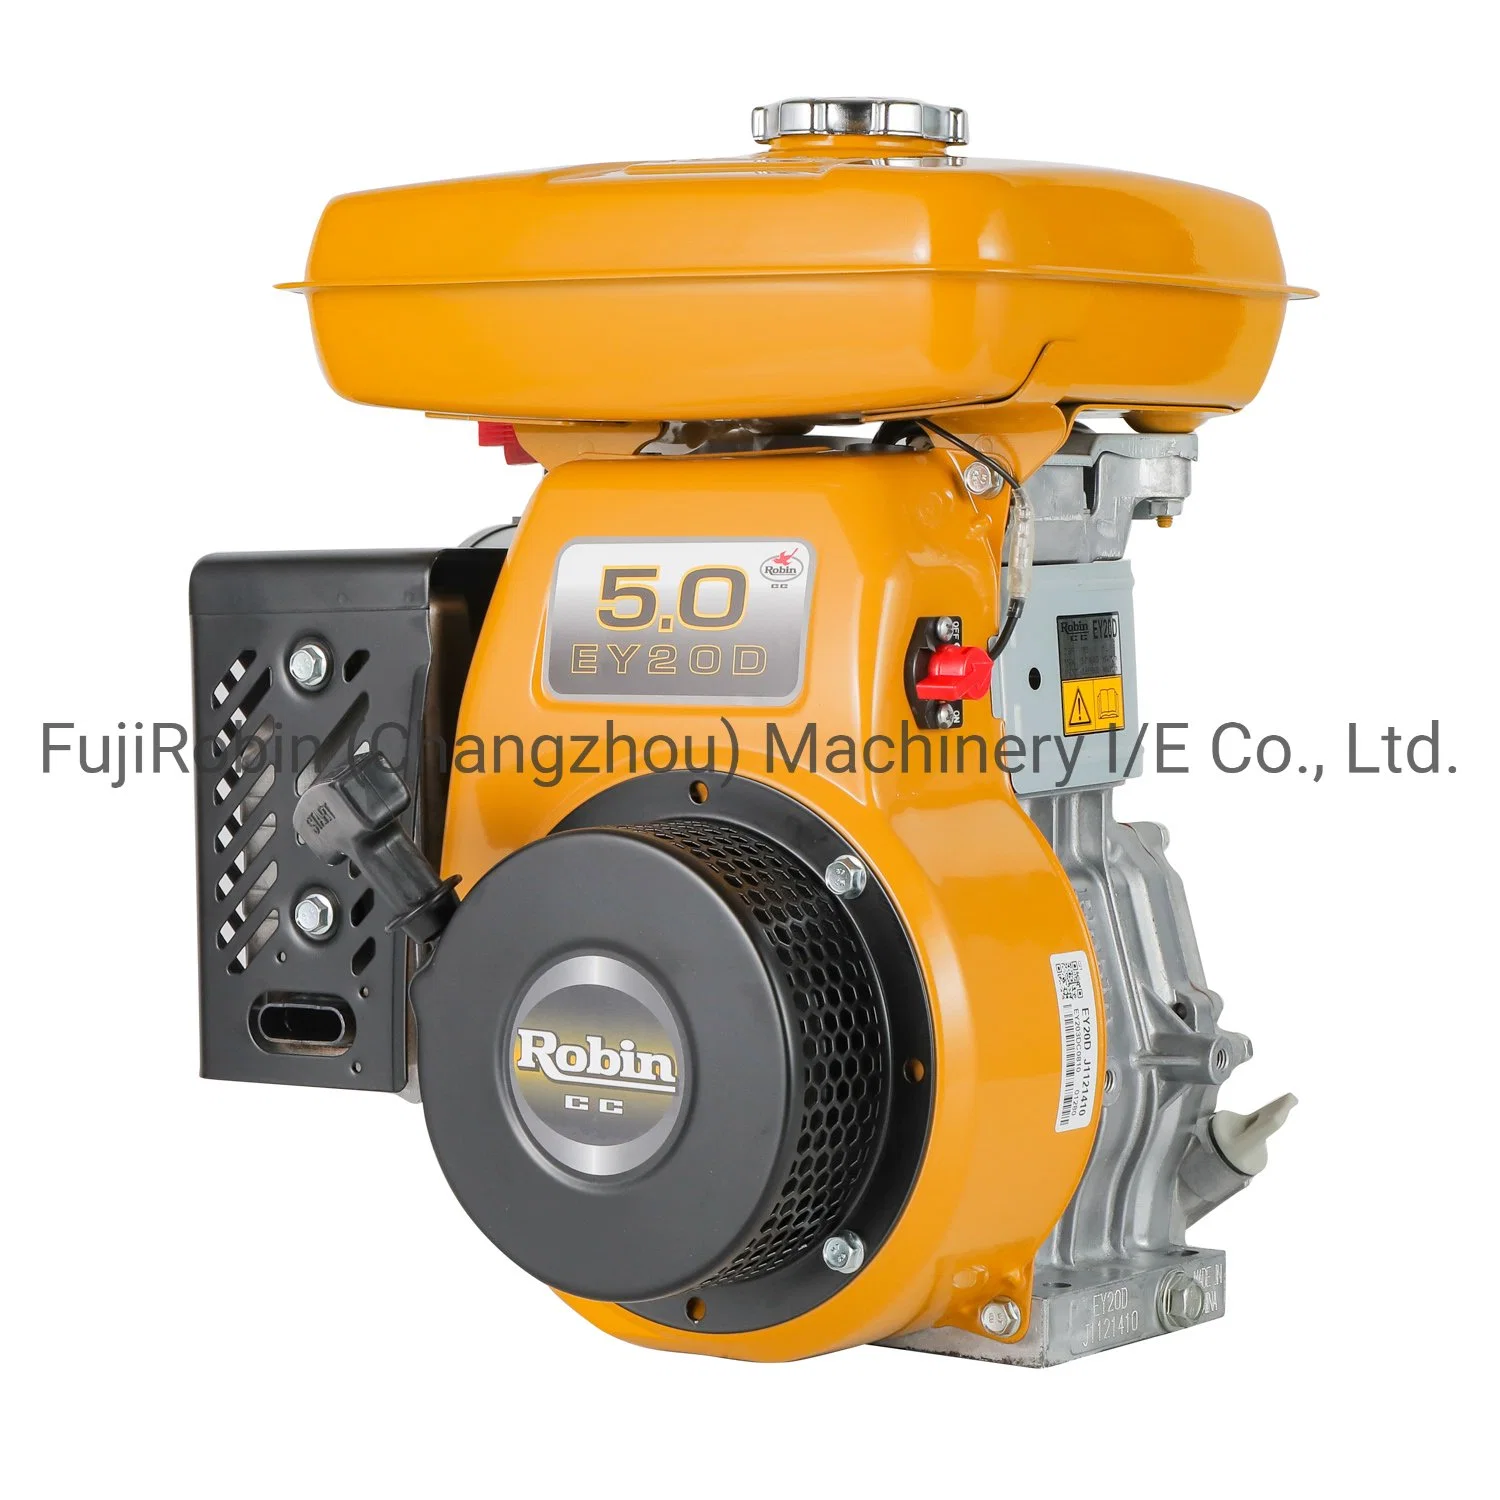 Aluminum Alloy Material Robin Gaosline Engine Ey20 Lower Price in Changzhou China